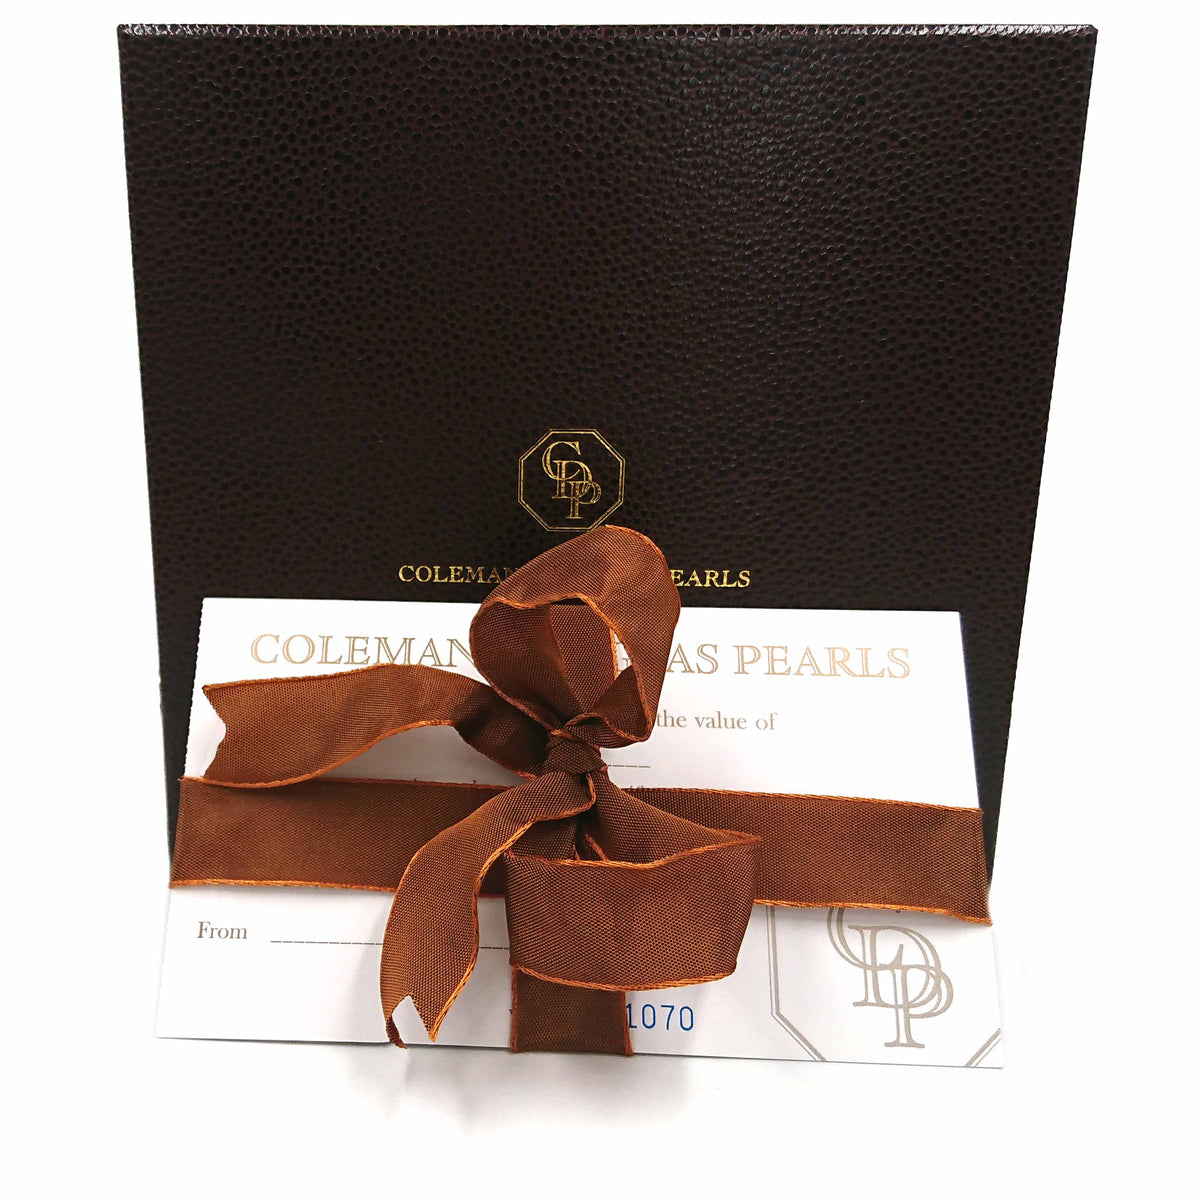 The CDP Gift Card - Our Recognised Voucher